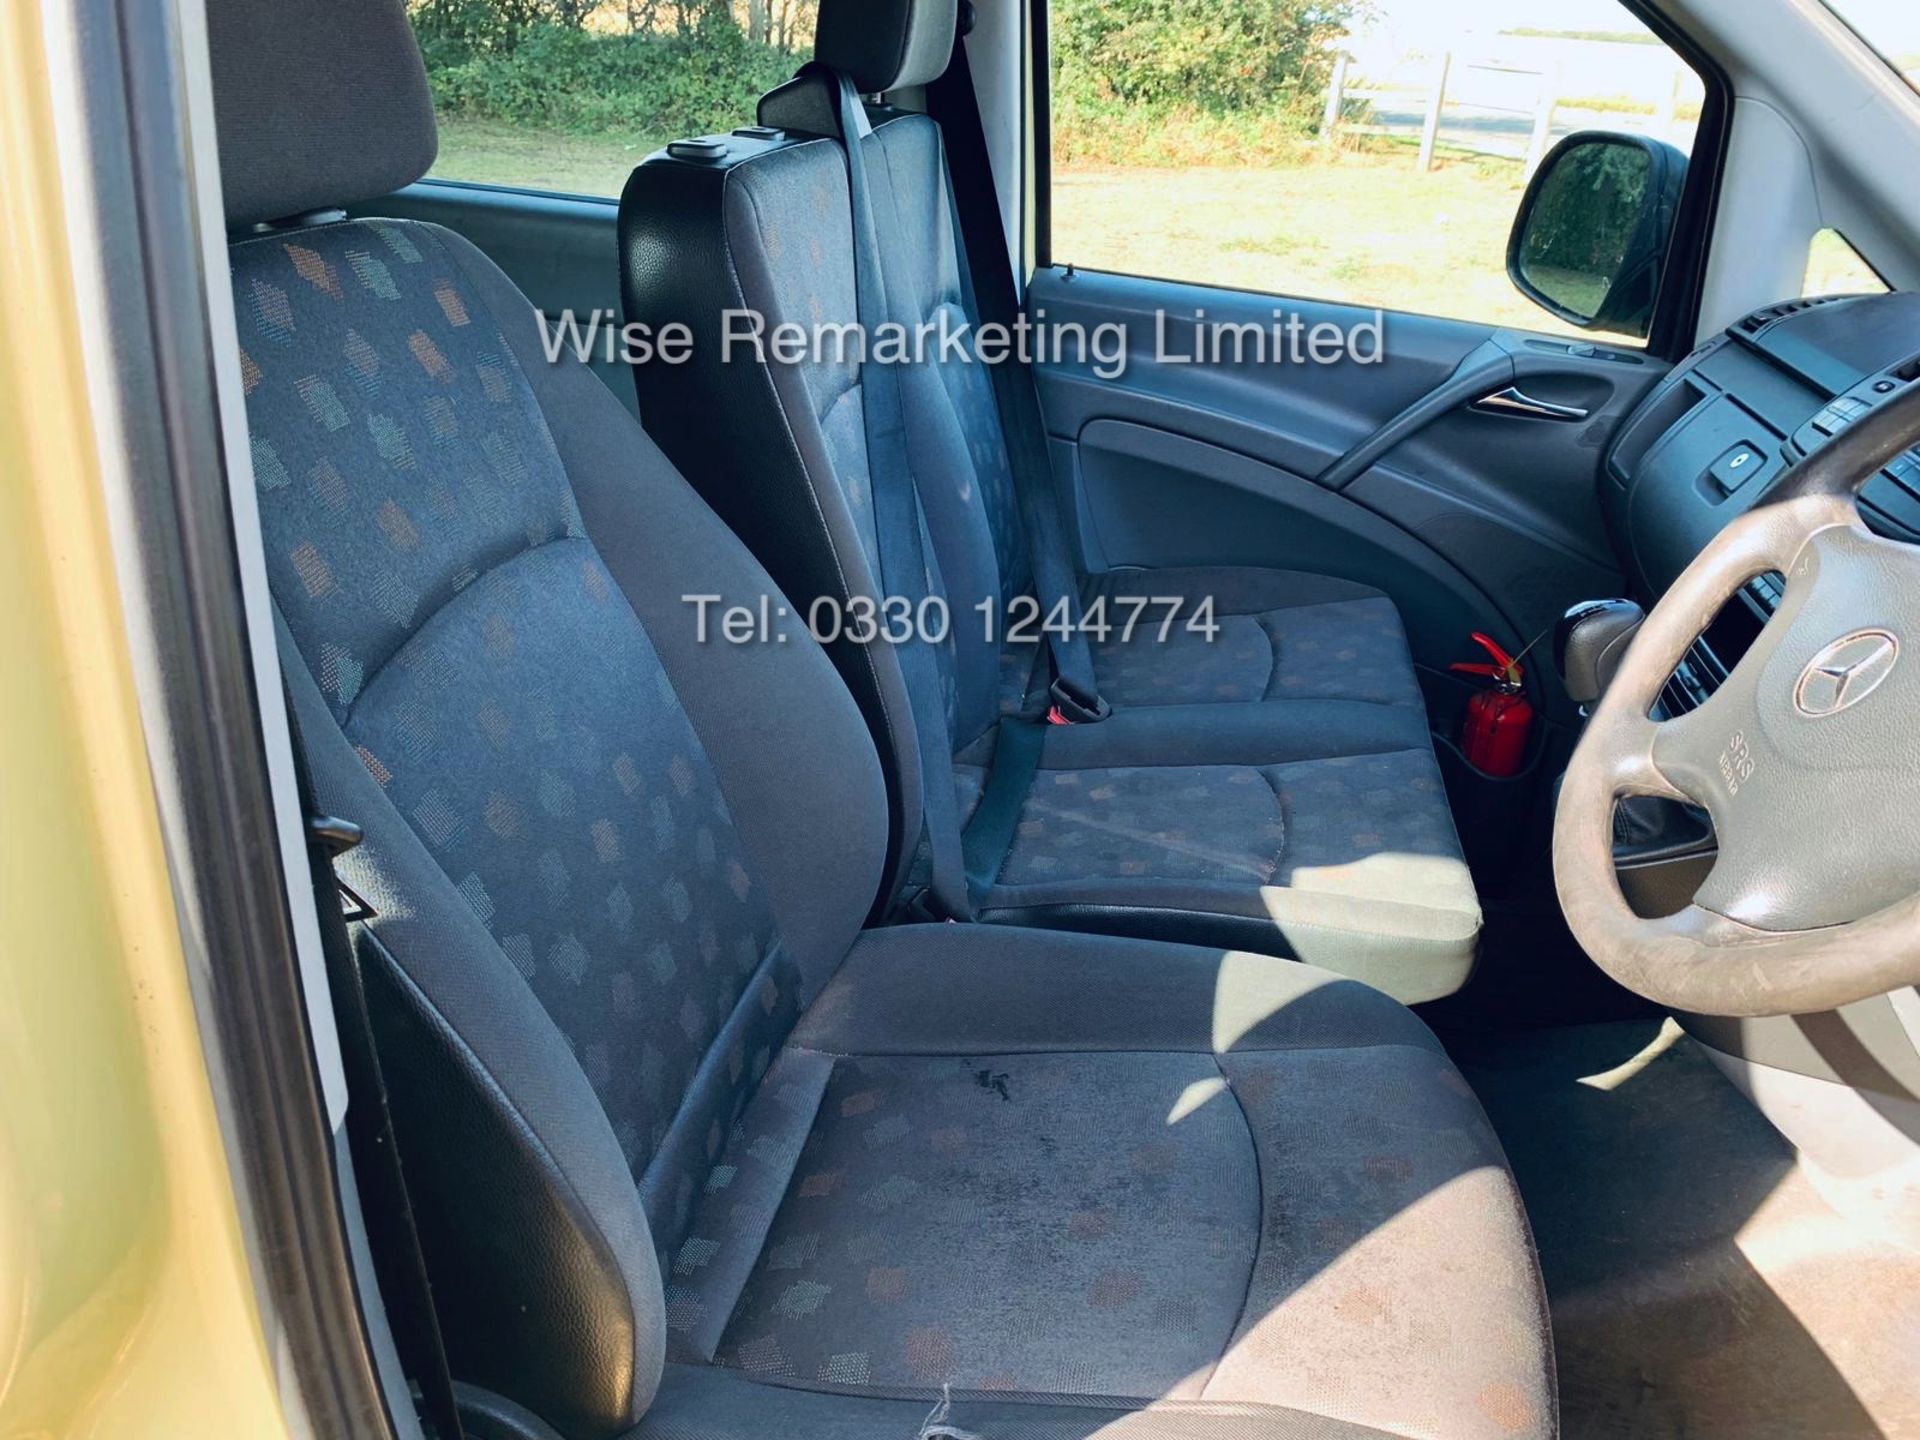 MERCEDES VITO 111 2.1 CDI TRAVELINER **9 SEATER** (2008 08 REG) 1 KEEPER FROM NEW - Image 8 of 19